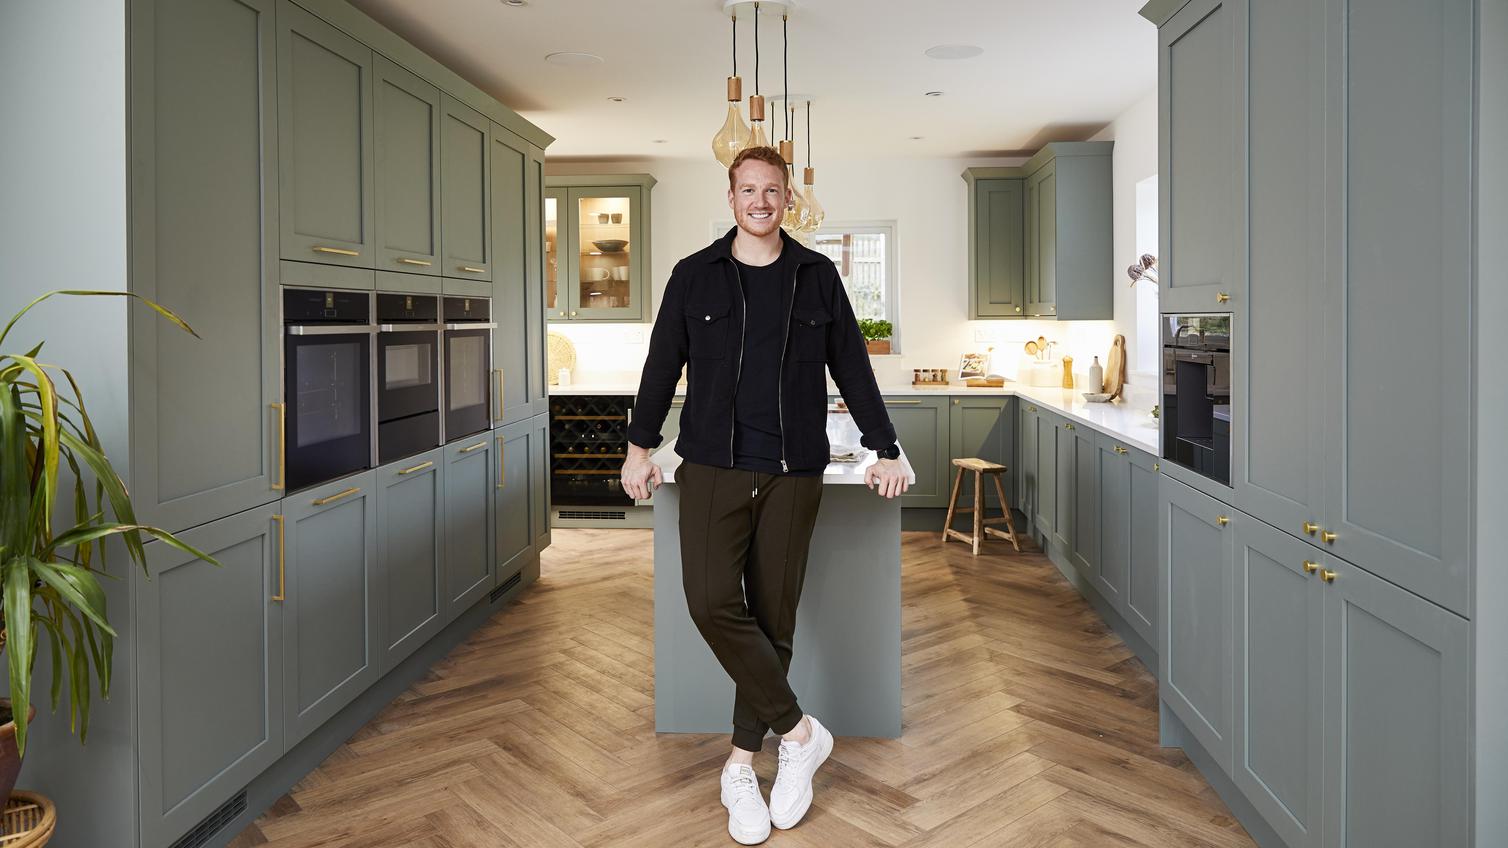 Greg Rutherford stood at the end of a kitchen island, showing sage green shaker cupboards and chevron wood flooring.